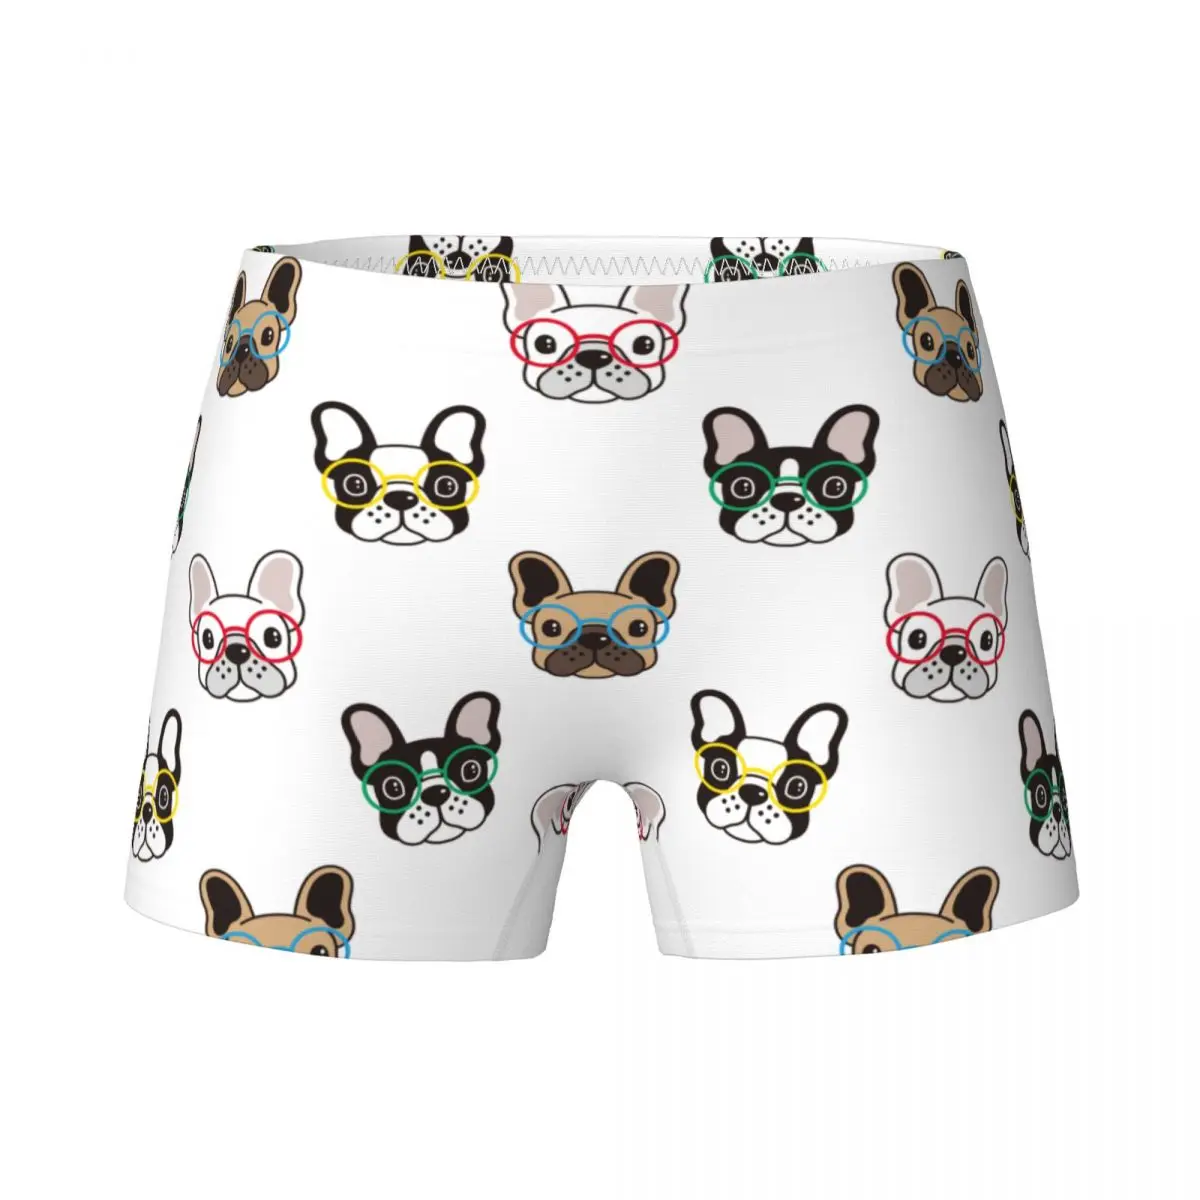 

Young Girls Bulldog Dog Boxer Child Cotton Pretty Underwear Kids Teenagers Animal Underpants Briefs For 4-15Y